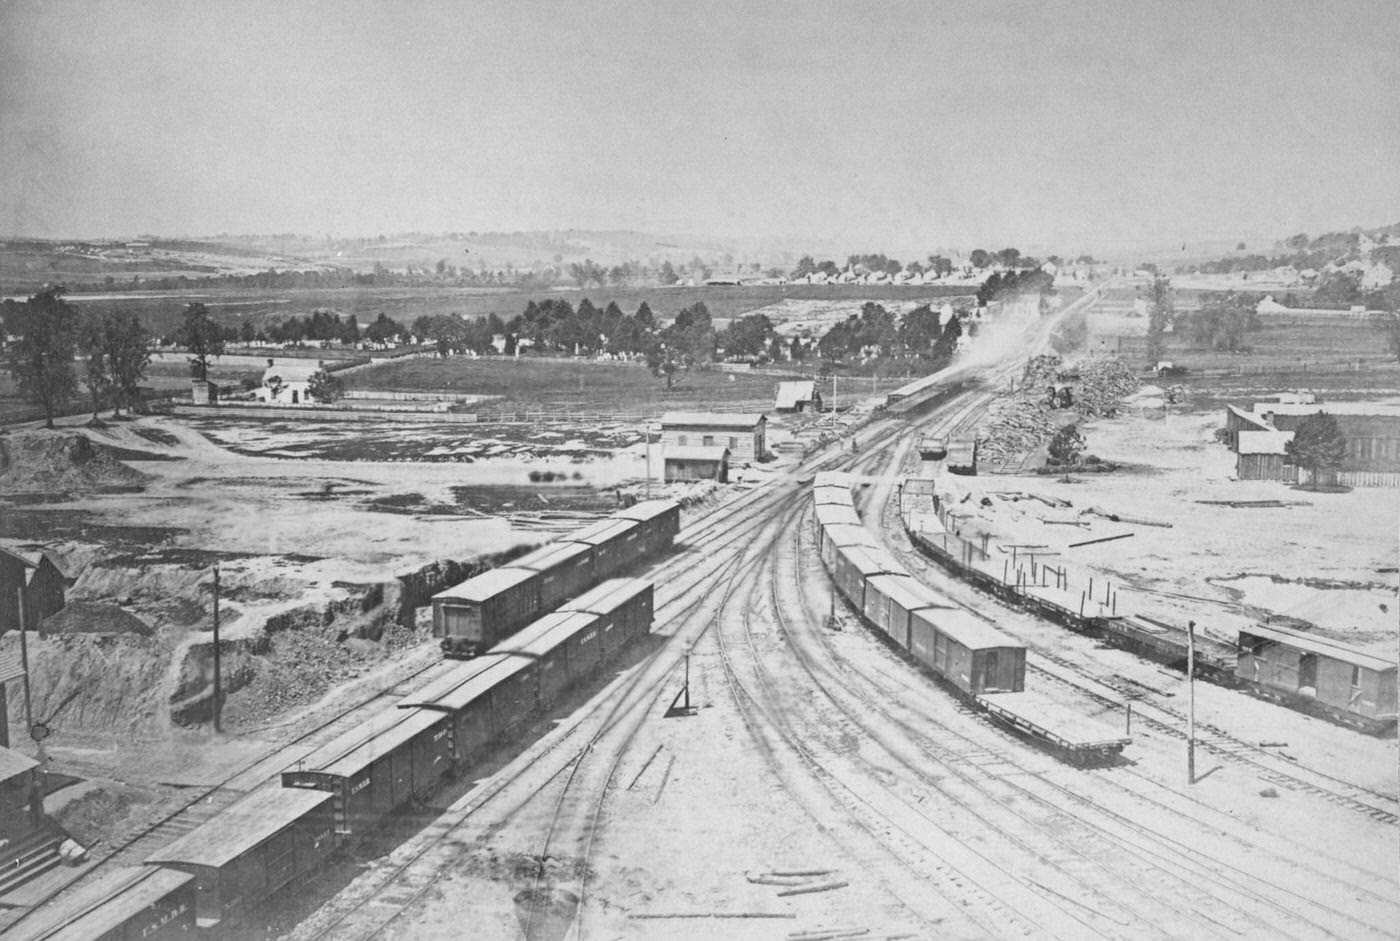 View of the trains yards, Alexandria, Virginia, 1862.